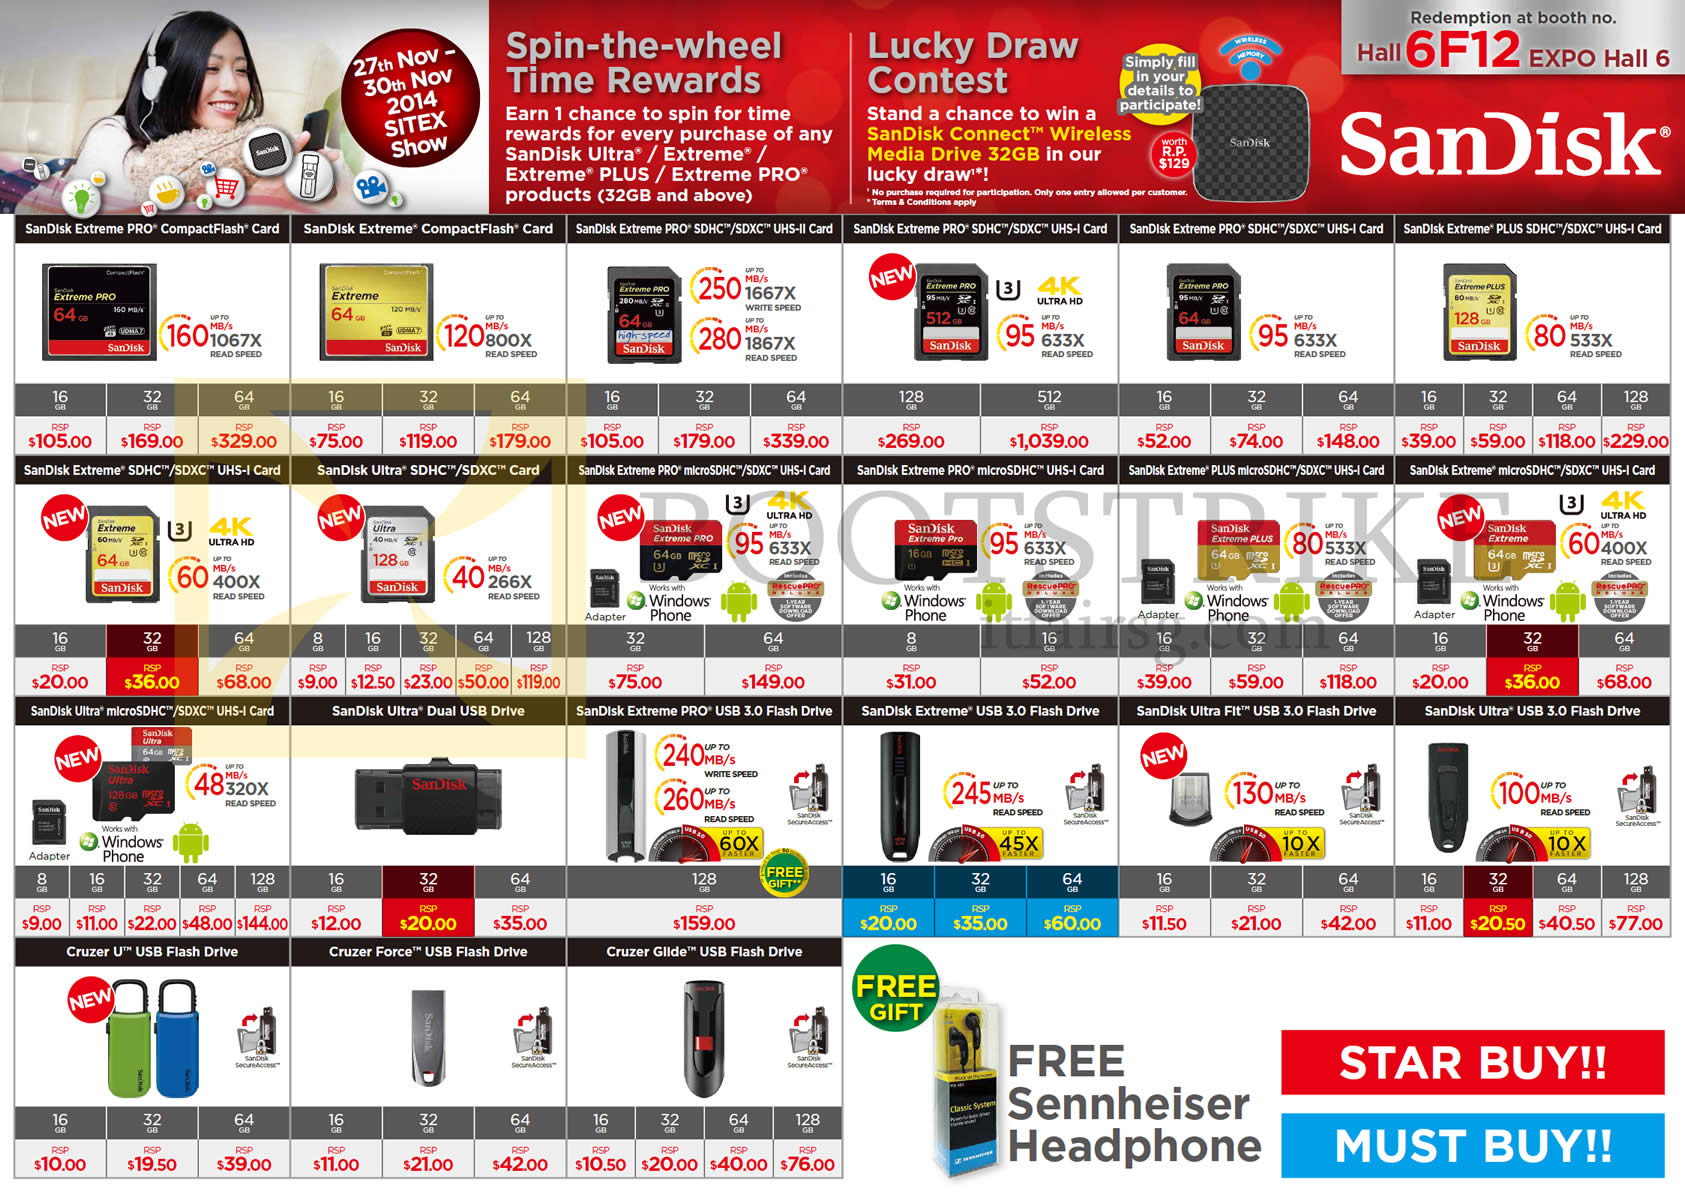 SITEX 2014 price list image brochure of Sandisk Memory Cards, Flash Drives, Compact Flash CF, Pro SDHC SDXC UHS, Extreme, MicroSDHC, USB Flash, Ultra, Fit, Cruzer, Force, Glide